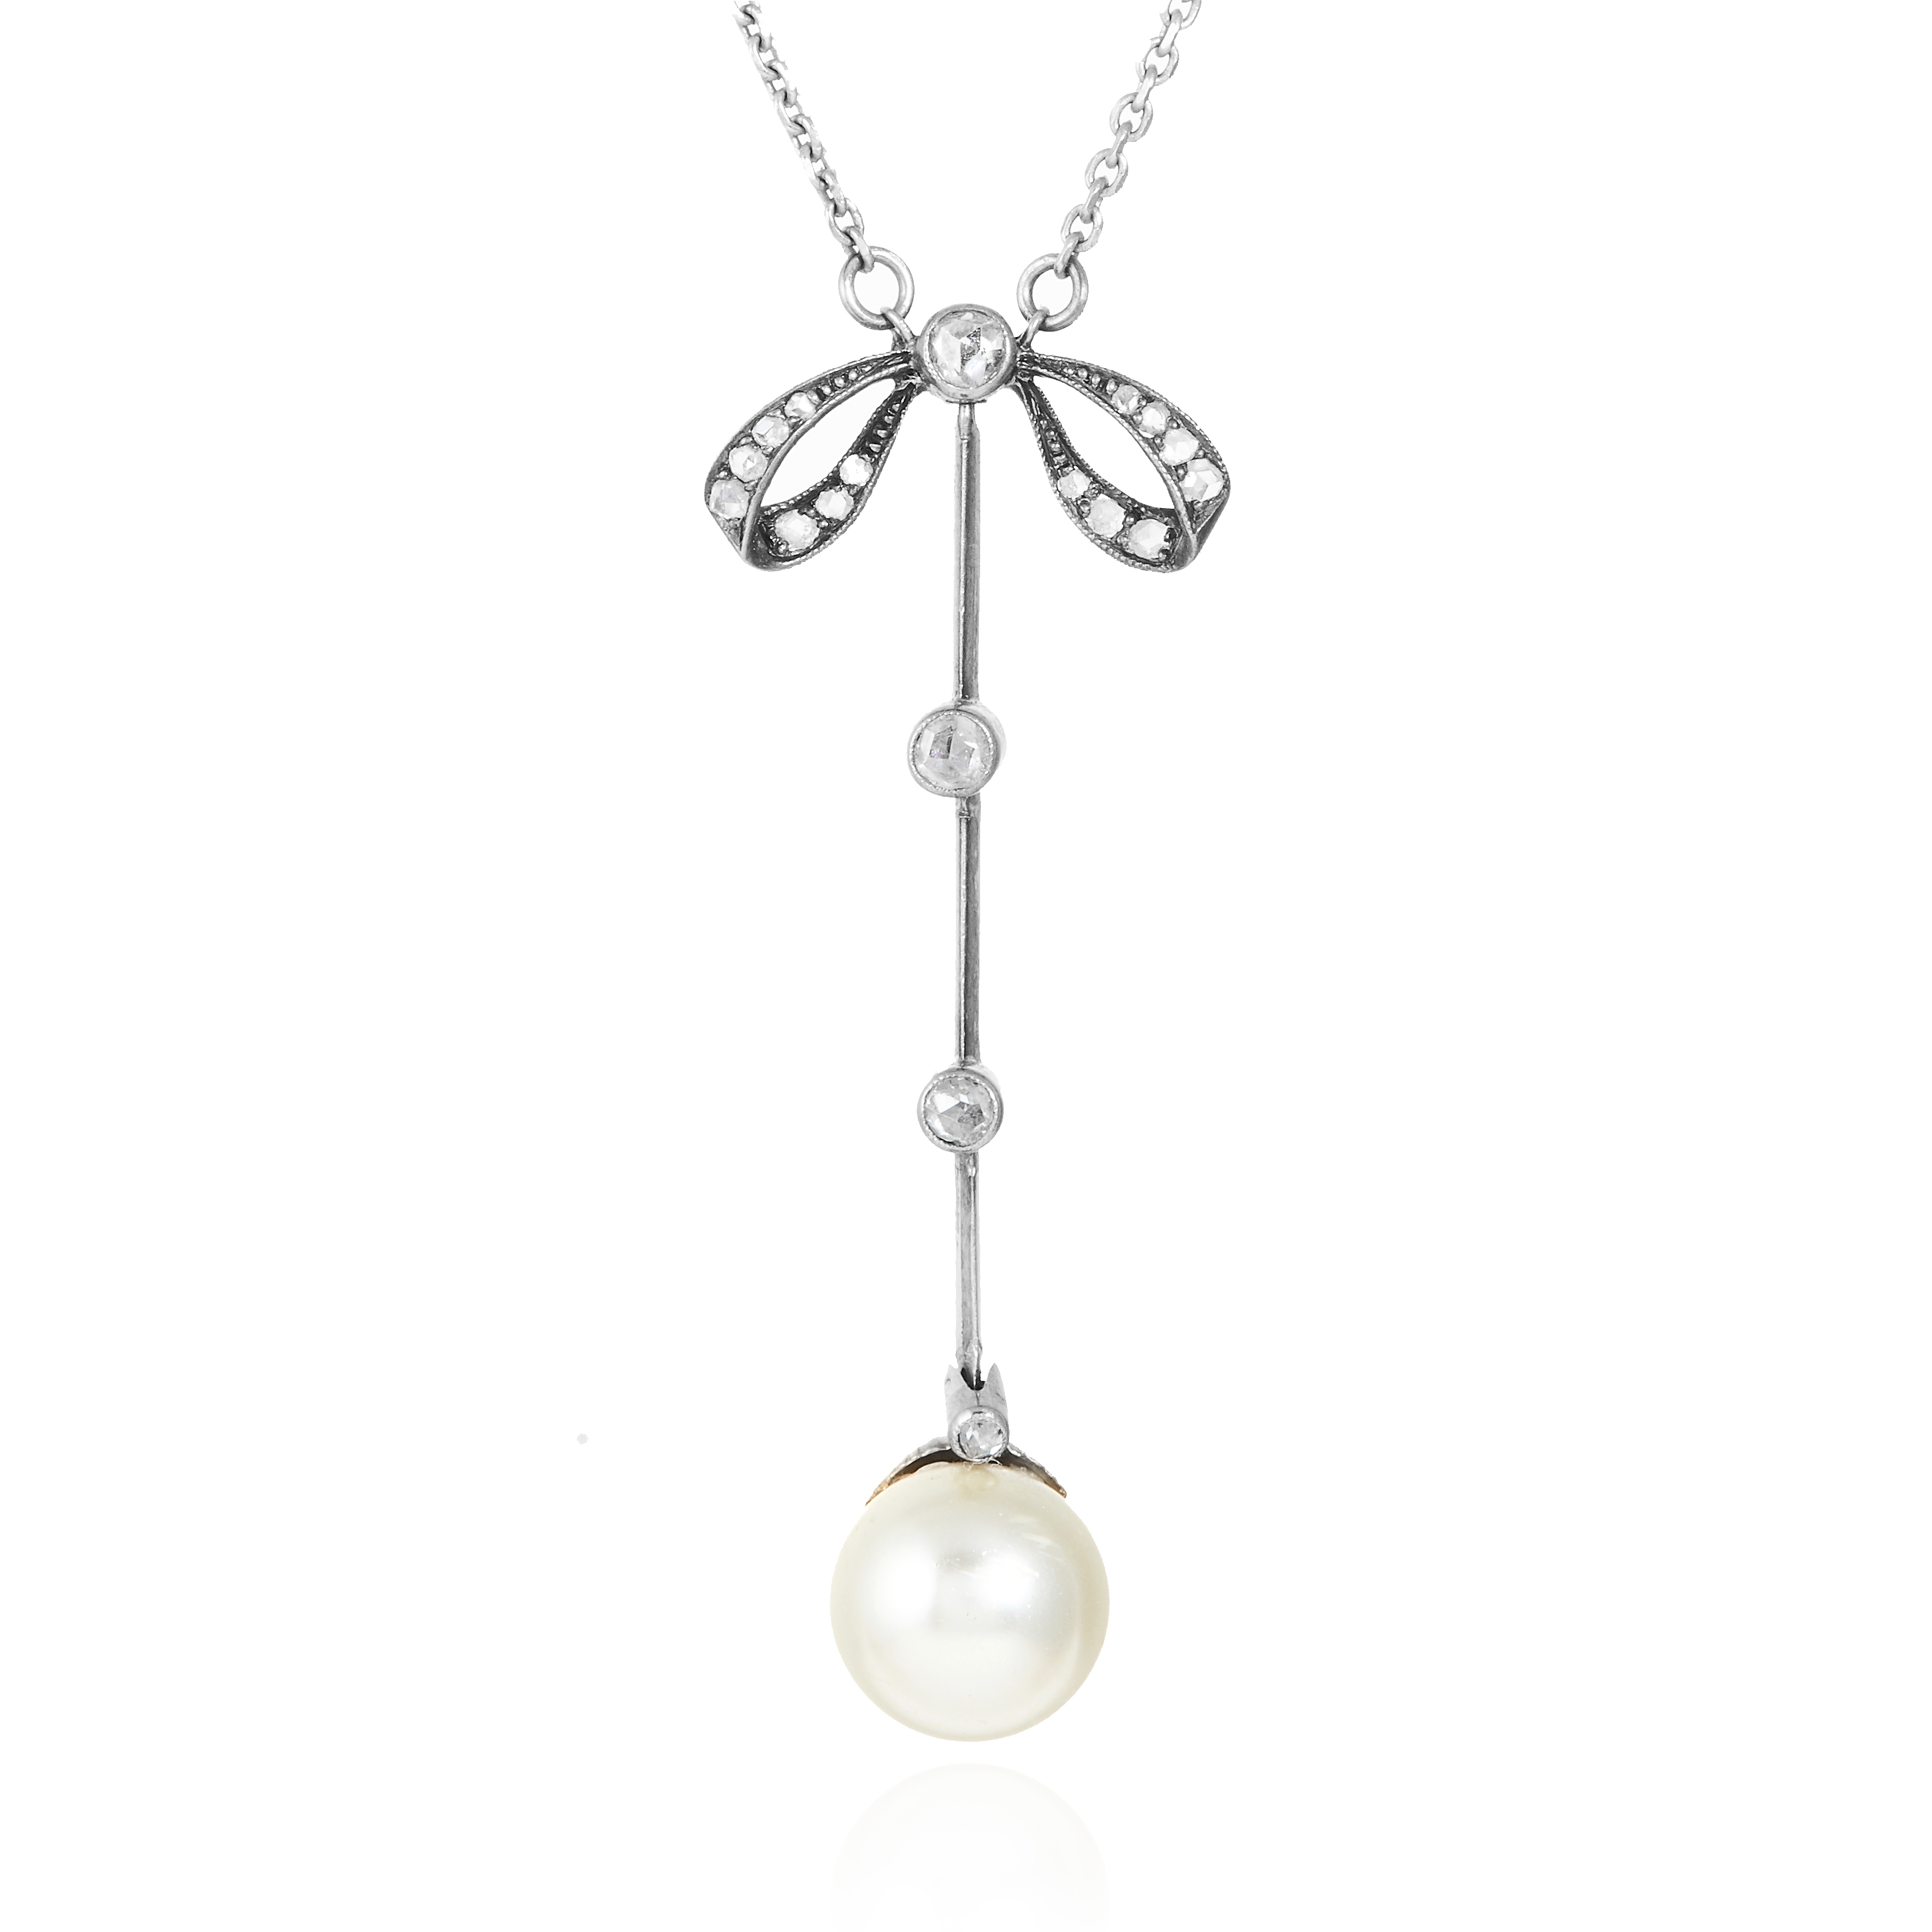 AN ANTIQUE PEARL AND DIAMOND NECKLACE the 9.8mm pearl suspended below a diamond jewelled ribbon